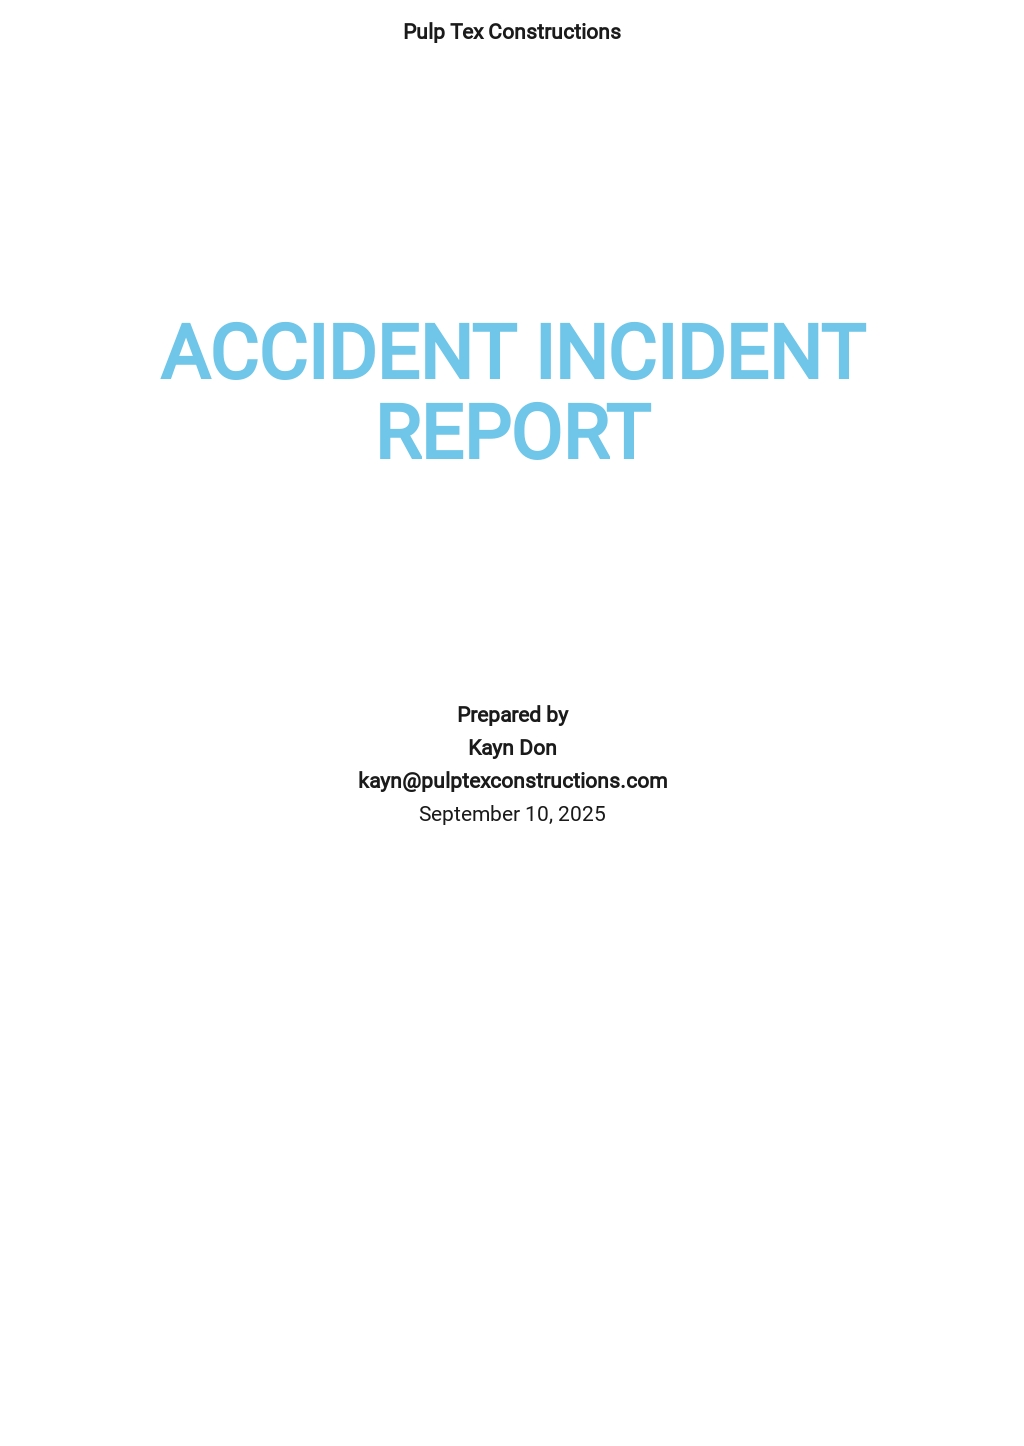 Free Accident Incident Report Template.jpe